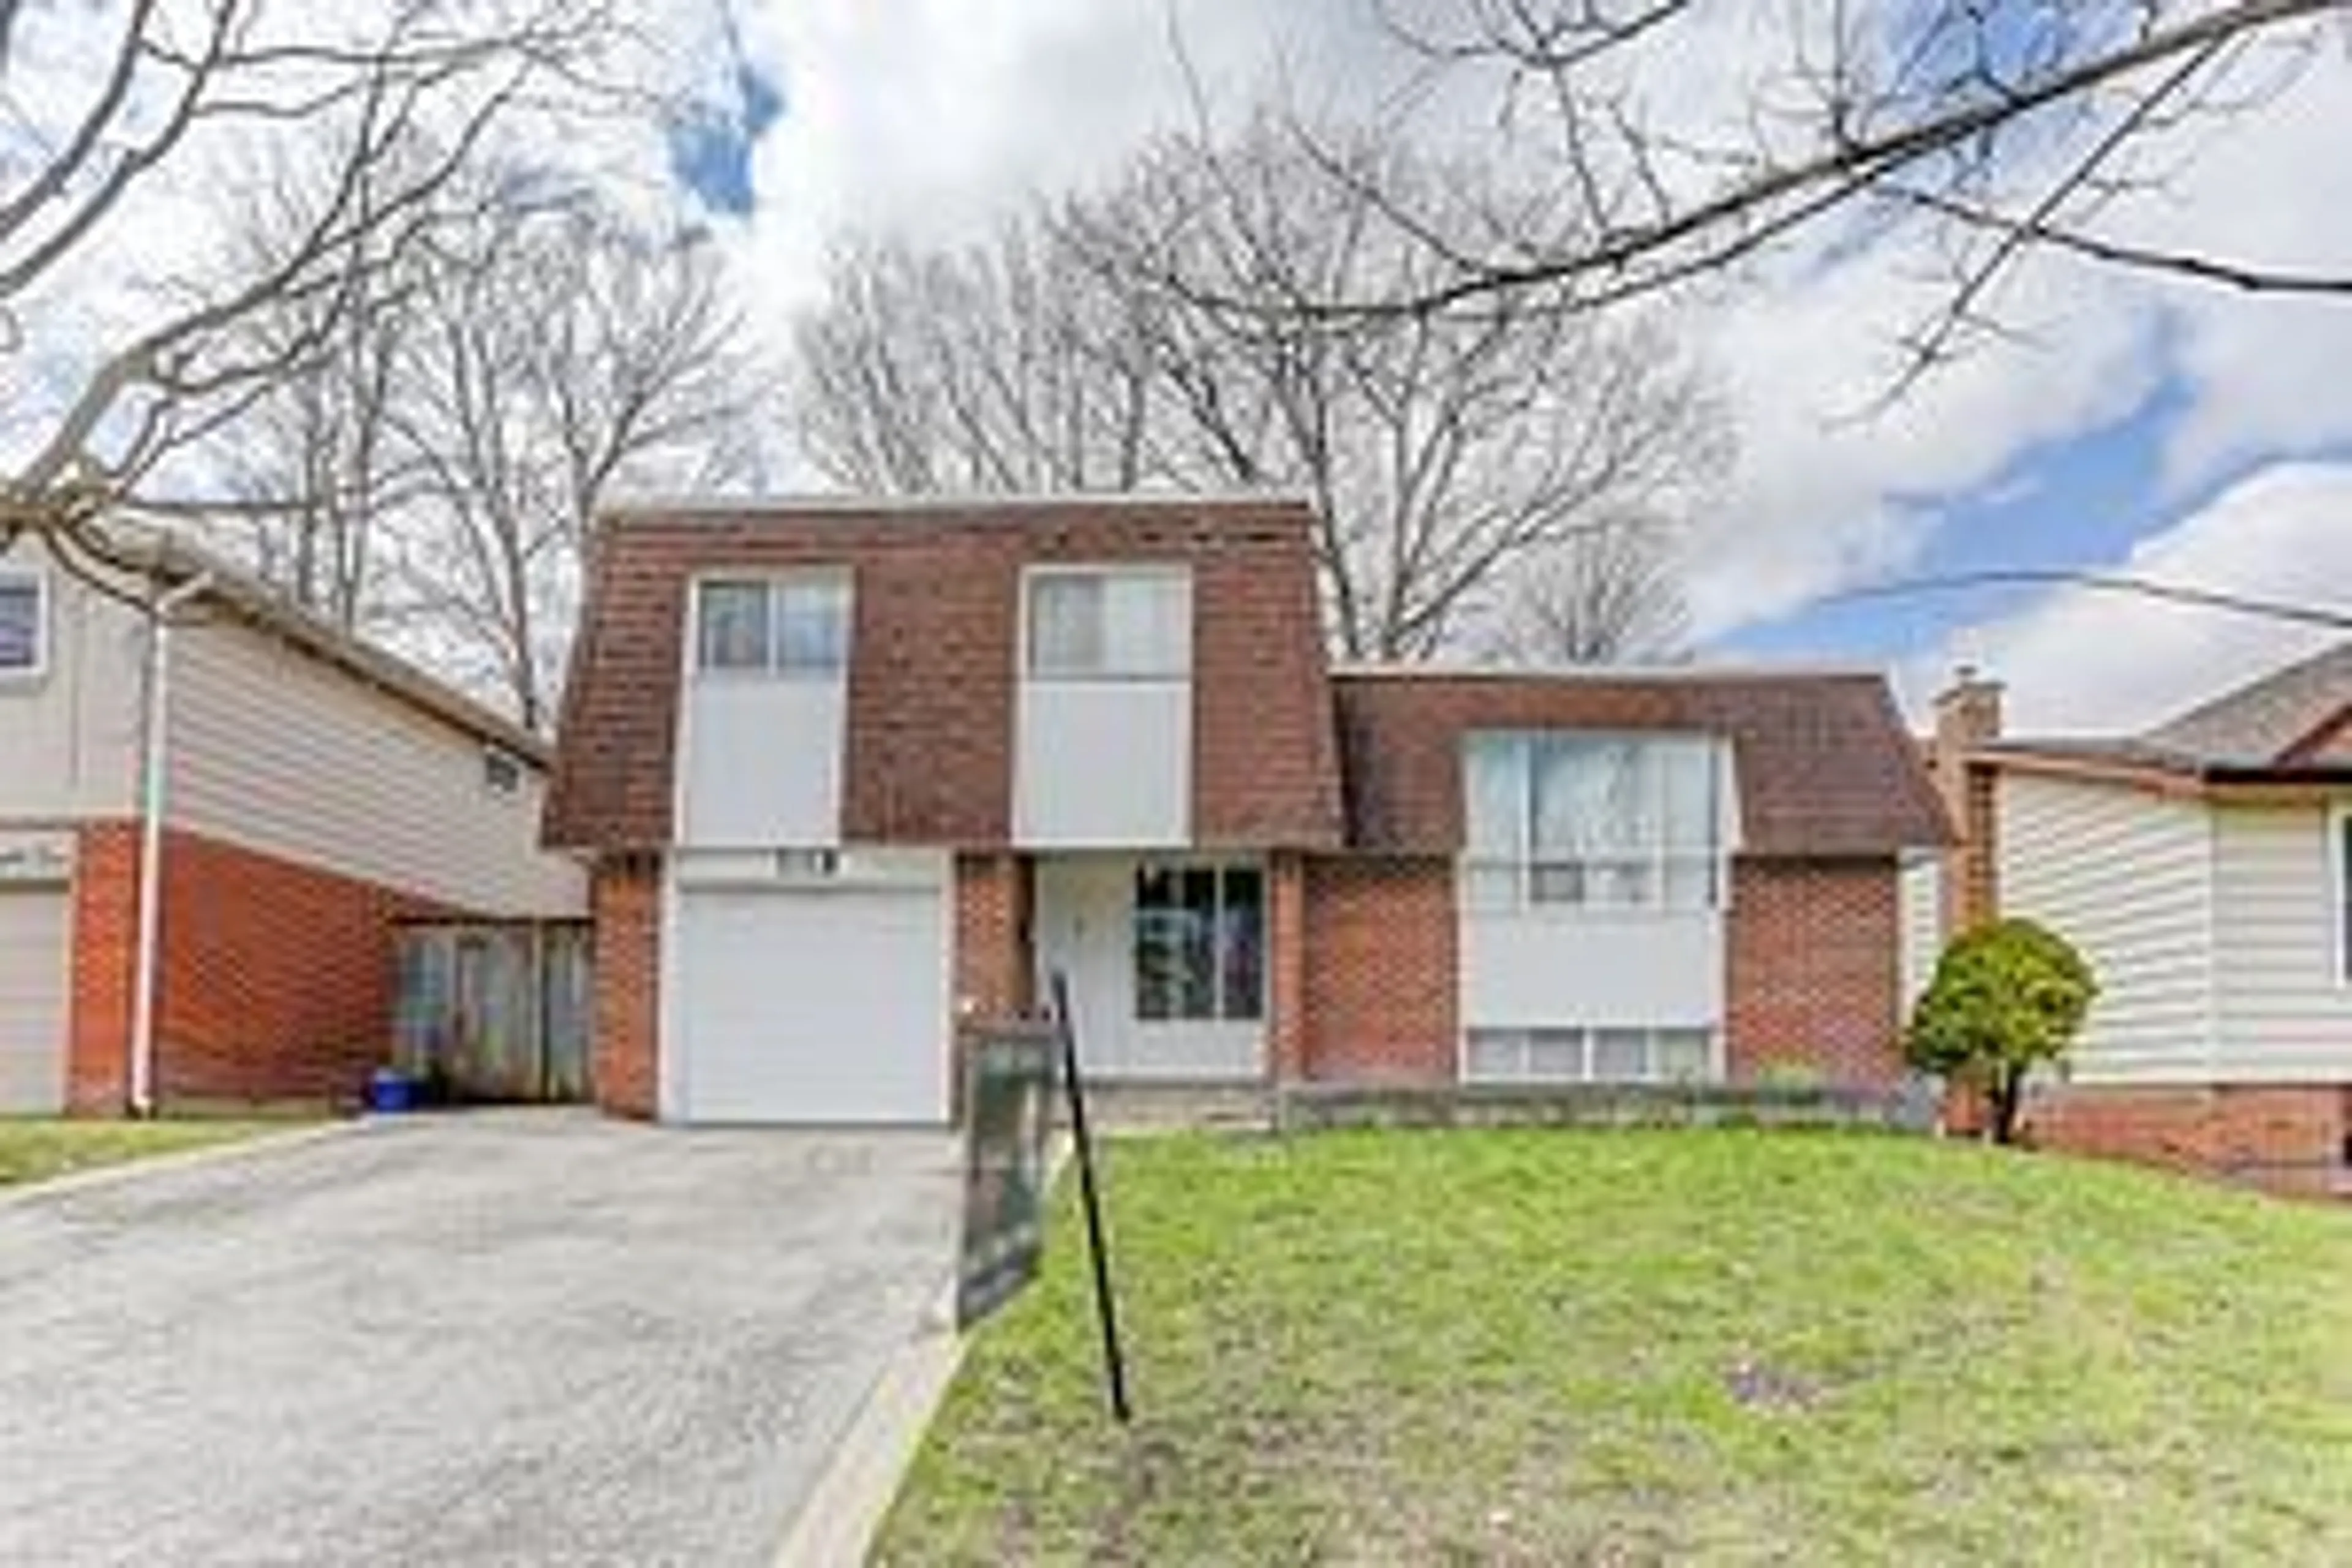 Home with brick exterior material for 143 Springdale Dr, Barrie Ontario L4M 4Y1